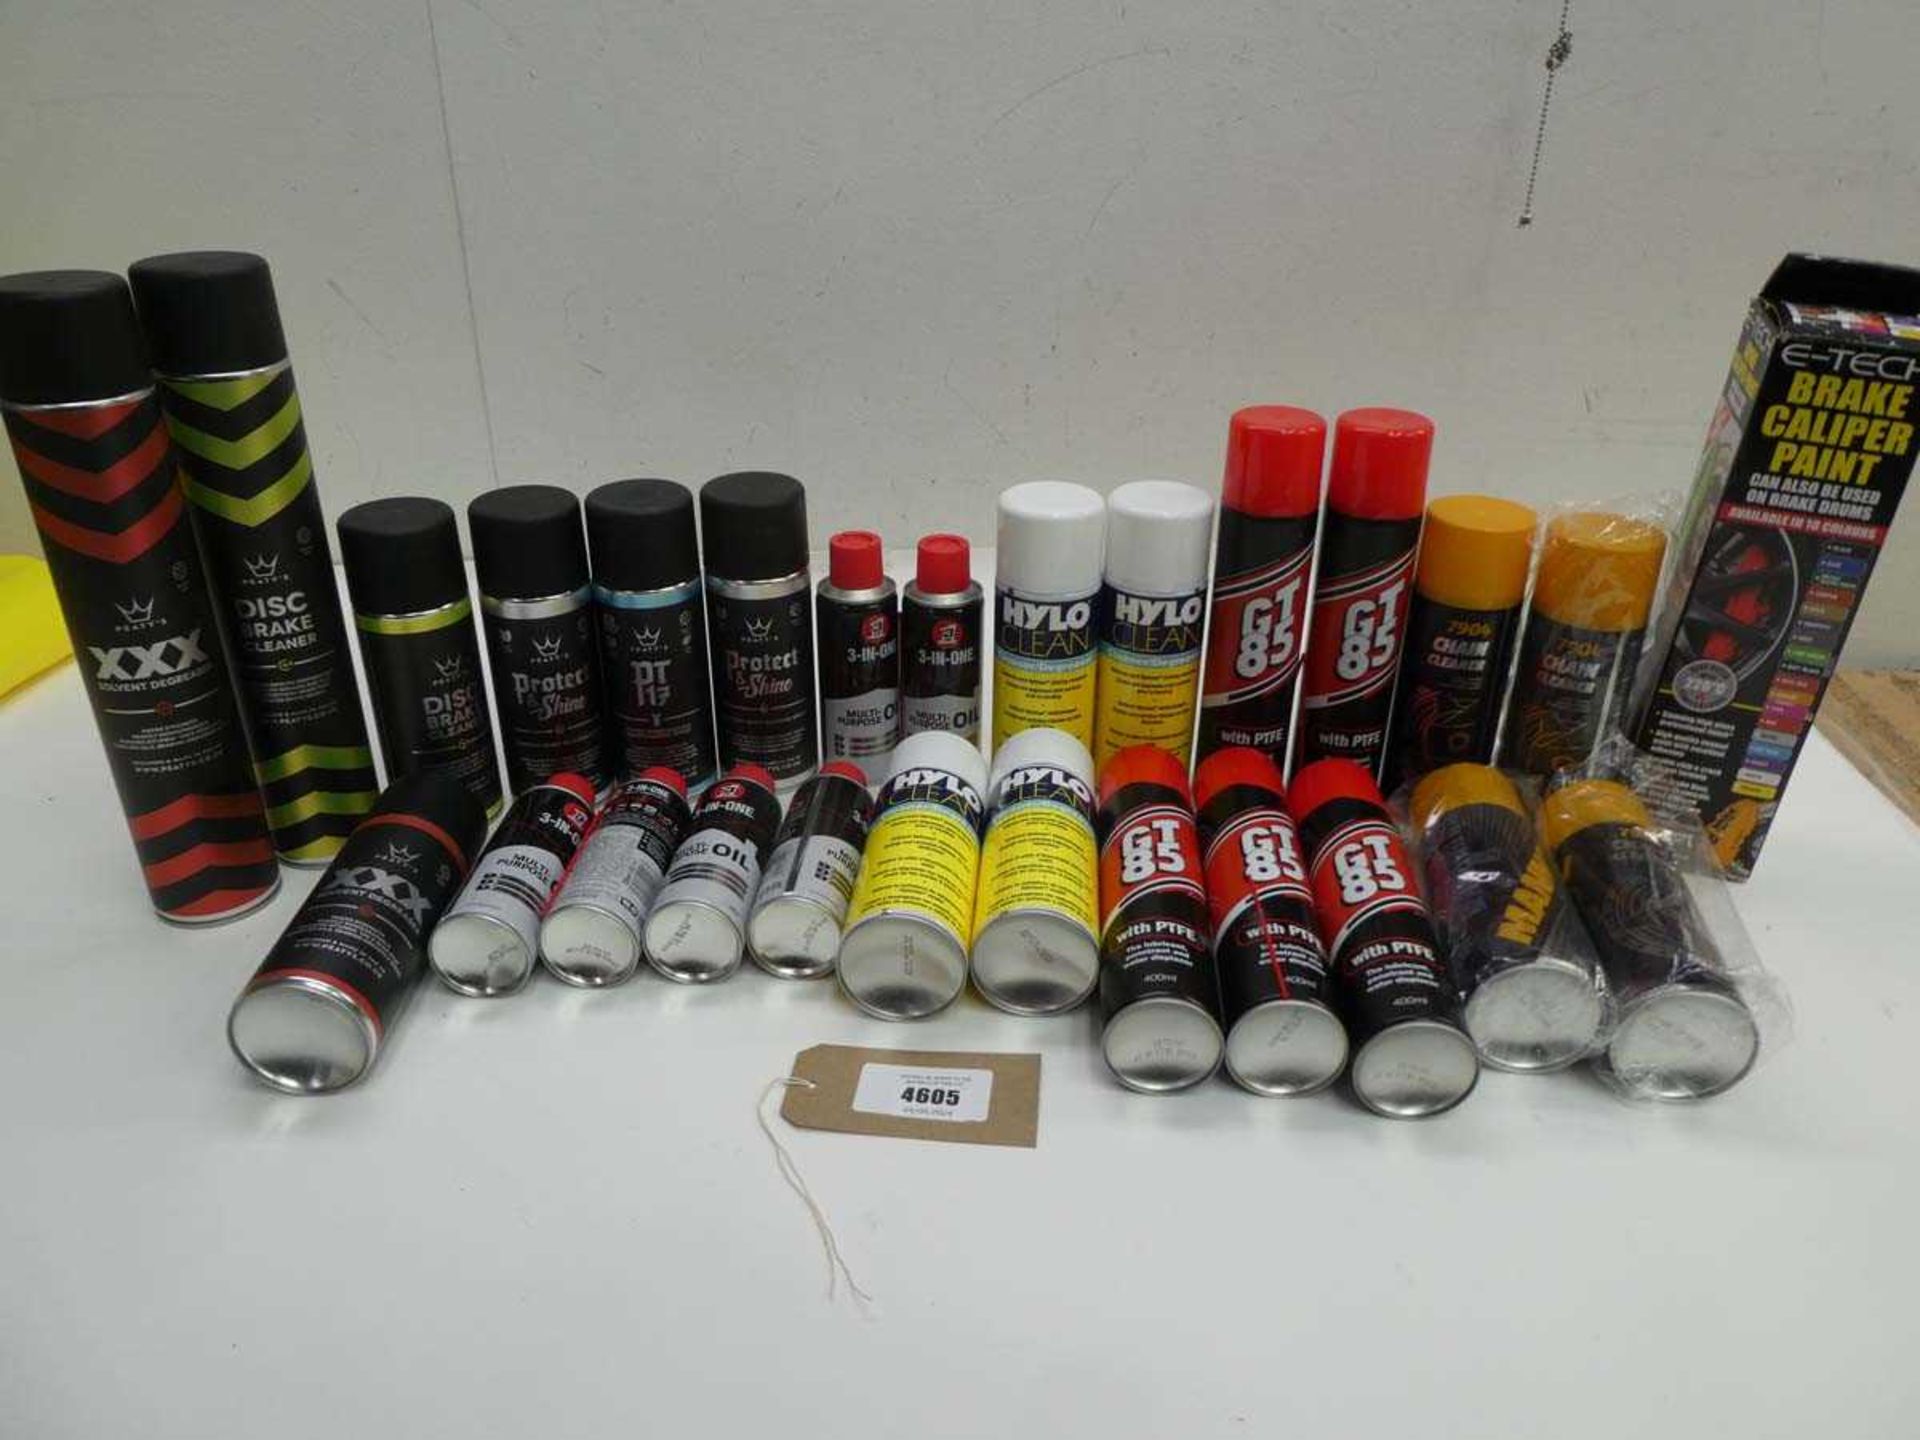 +VAT Multi Purpose oil, Cleaner/Degreaser, Lubricants, chain cleaner, Silicone spray etc